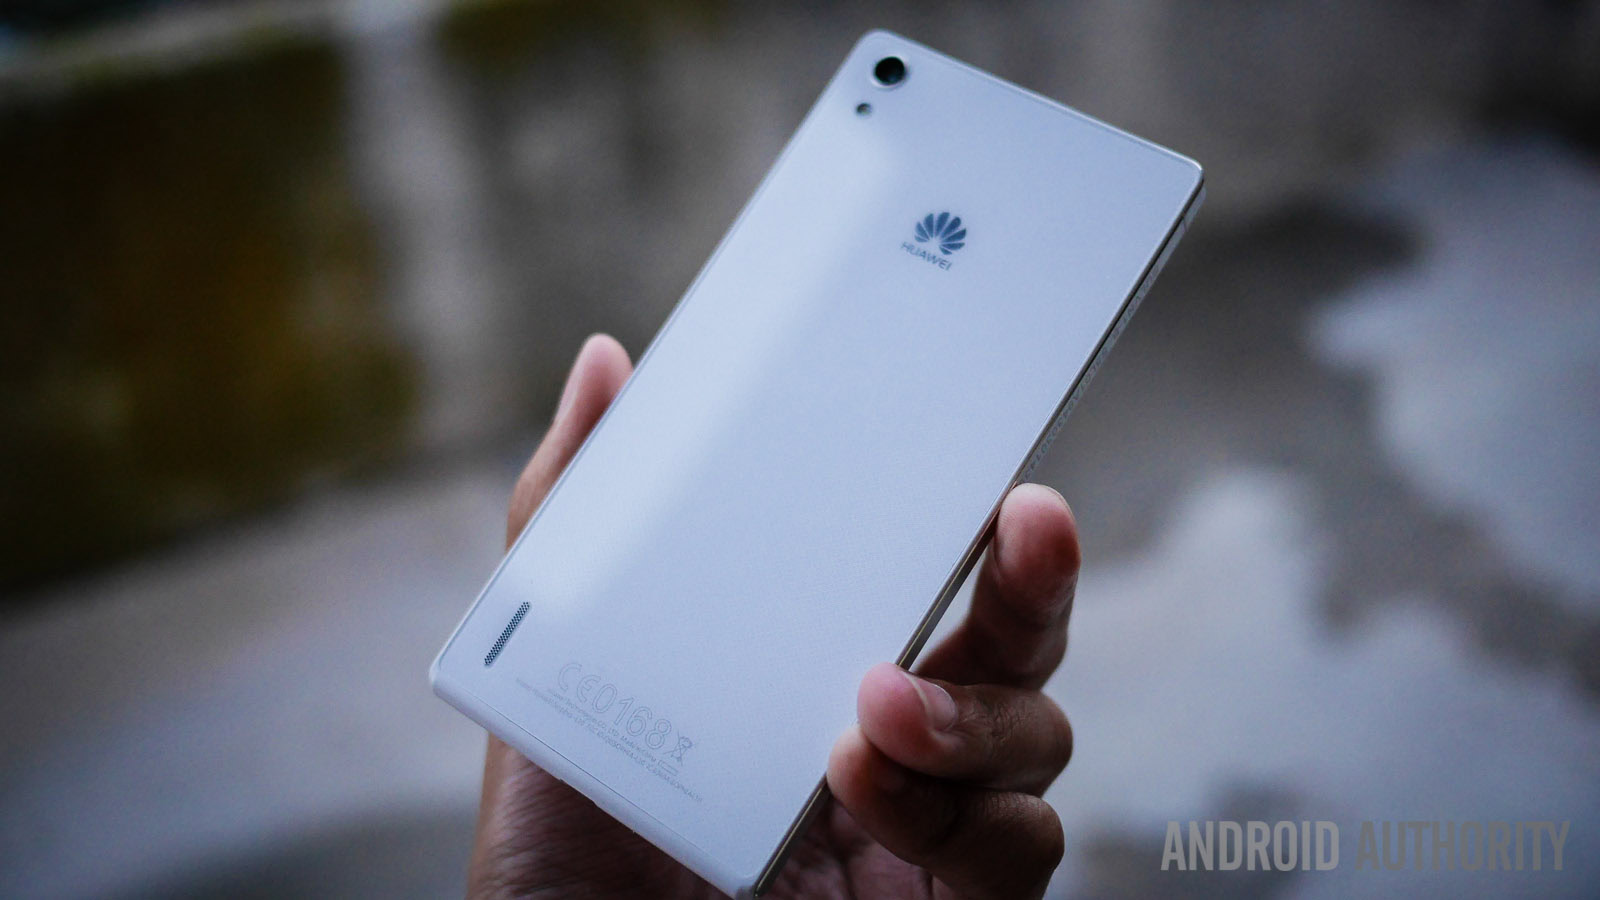 Meevoelen Begraafplaats Alice HUAWEI Ascend P7 specs, features - what you need to know